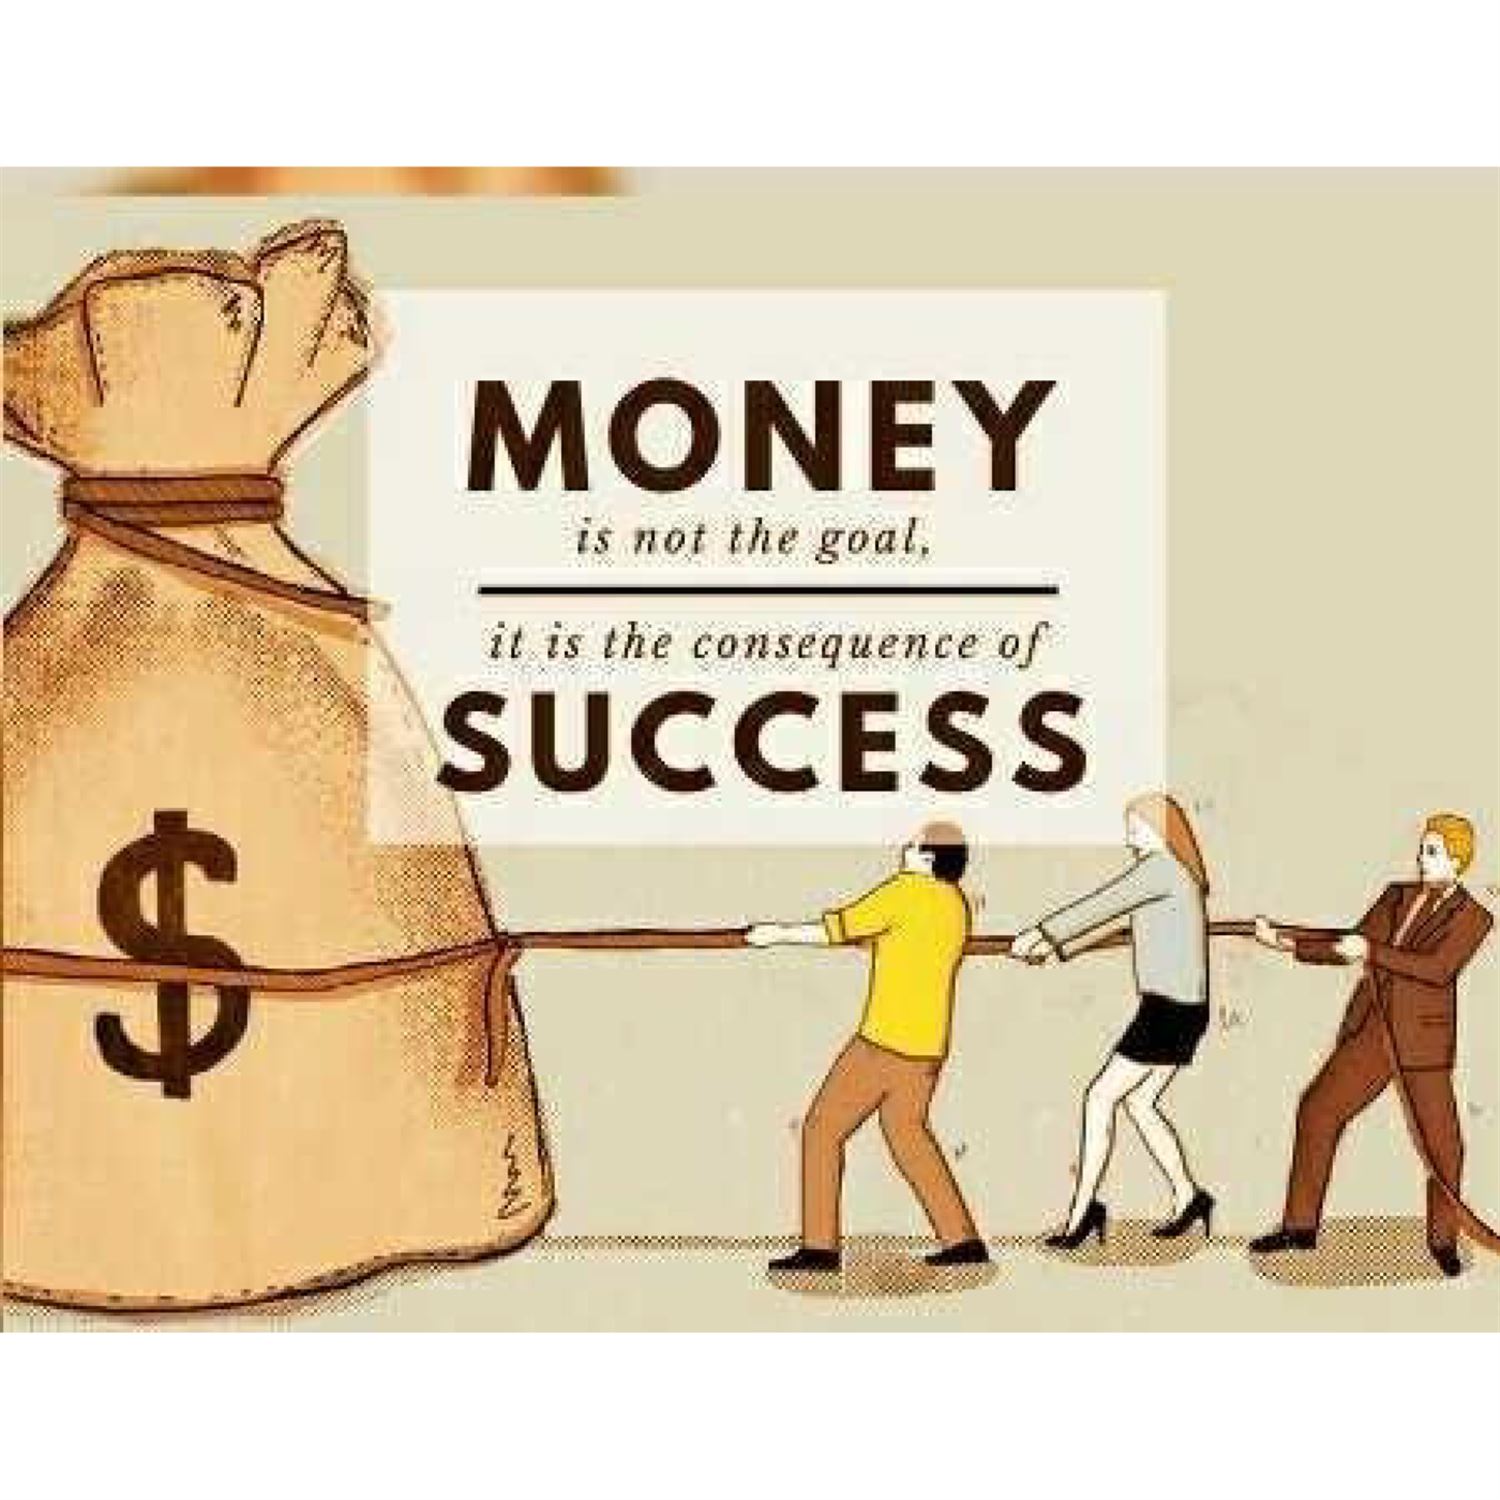 Money and its relation to success